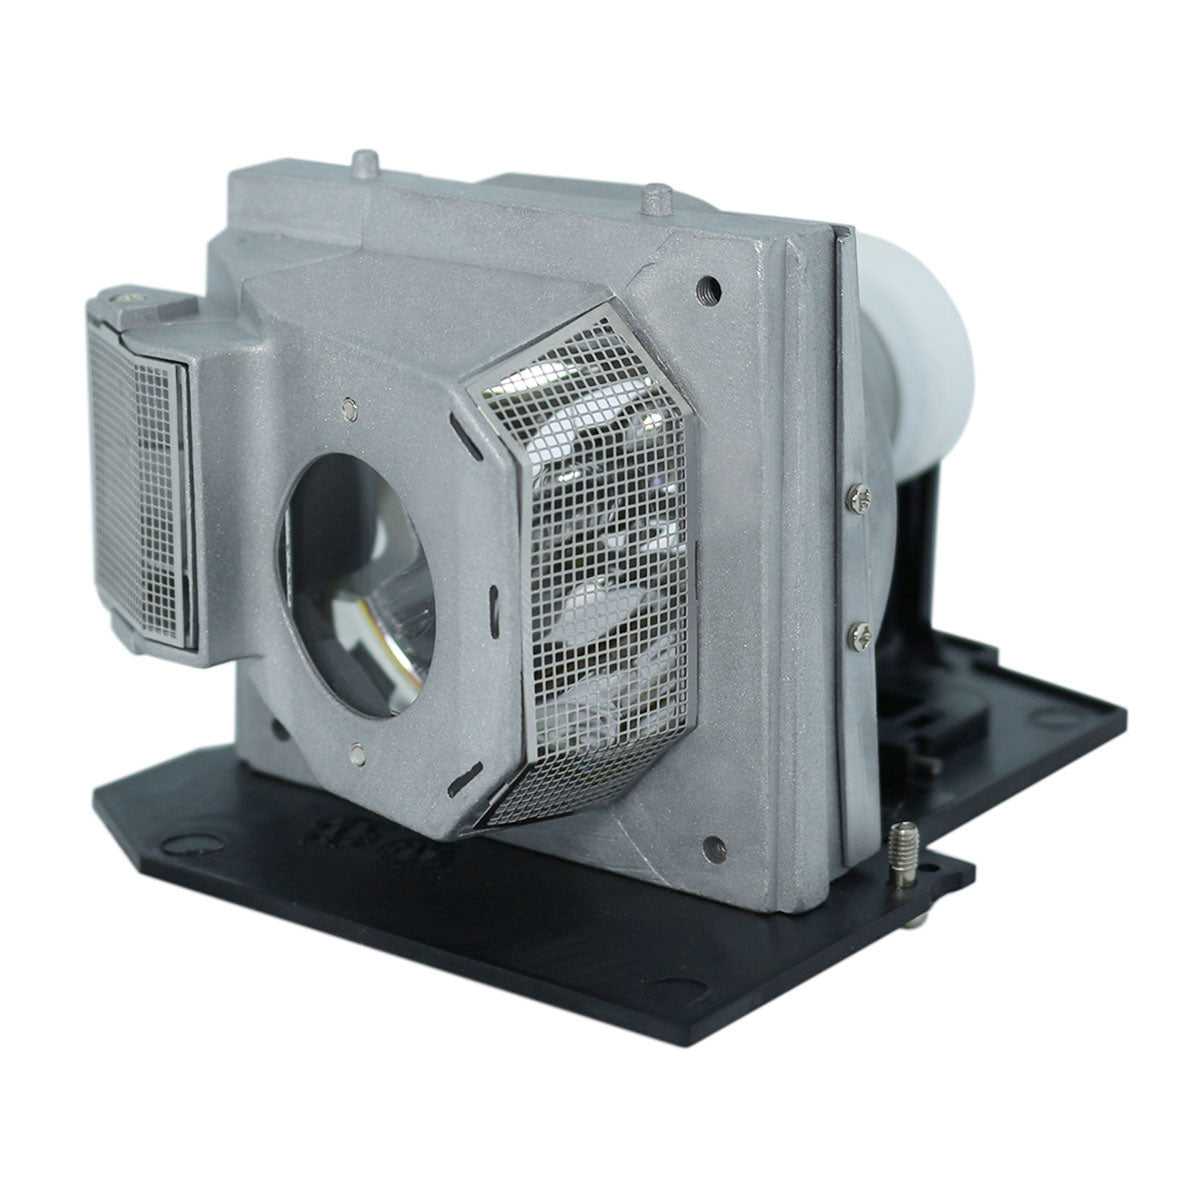 Knoll Systems SP-LAMP-032 Osram Projector Lamp Module